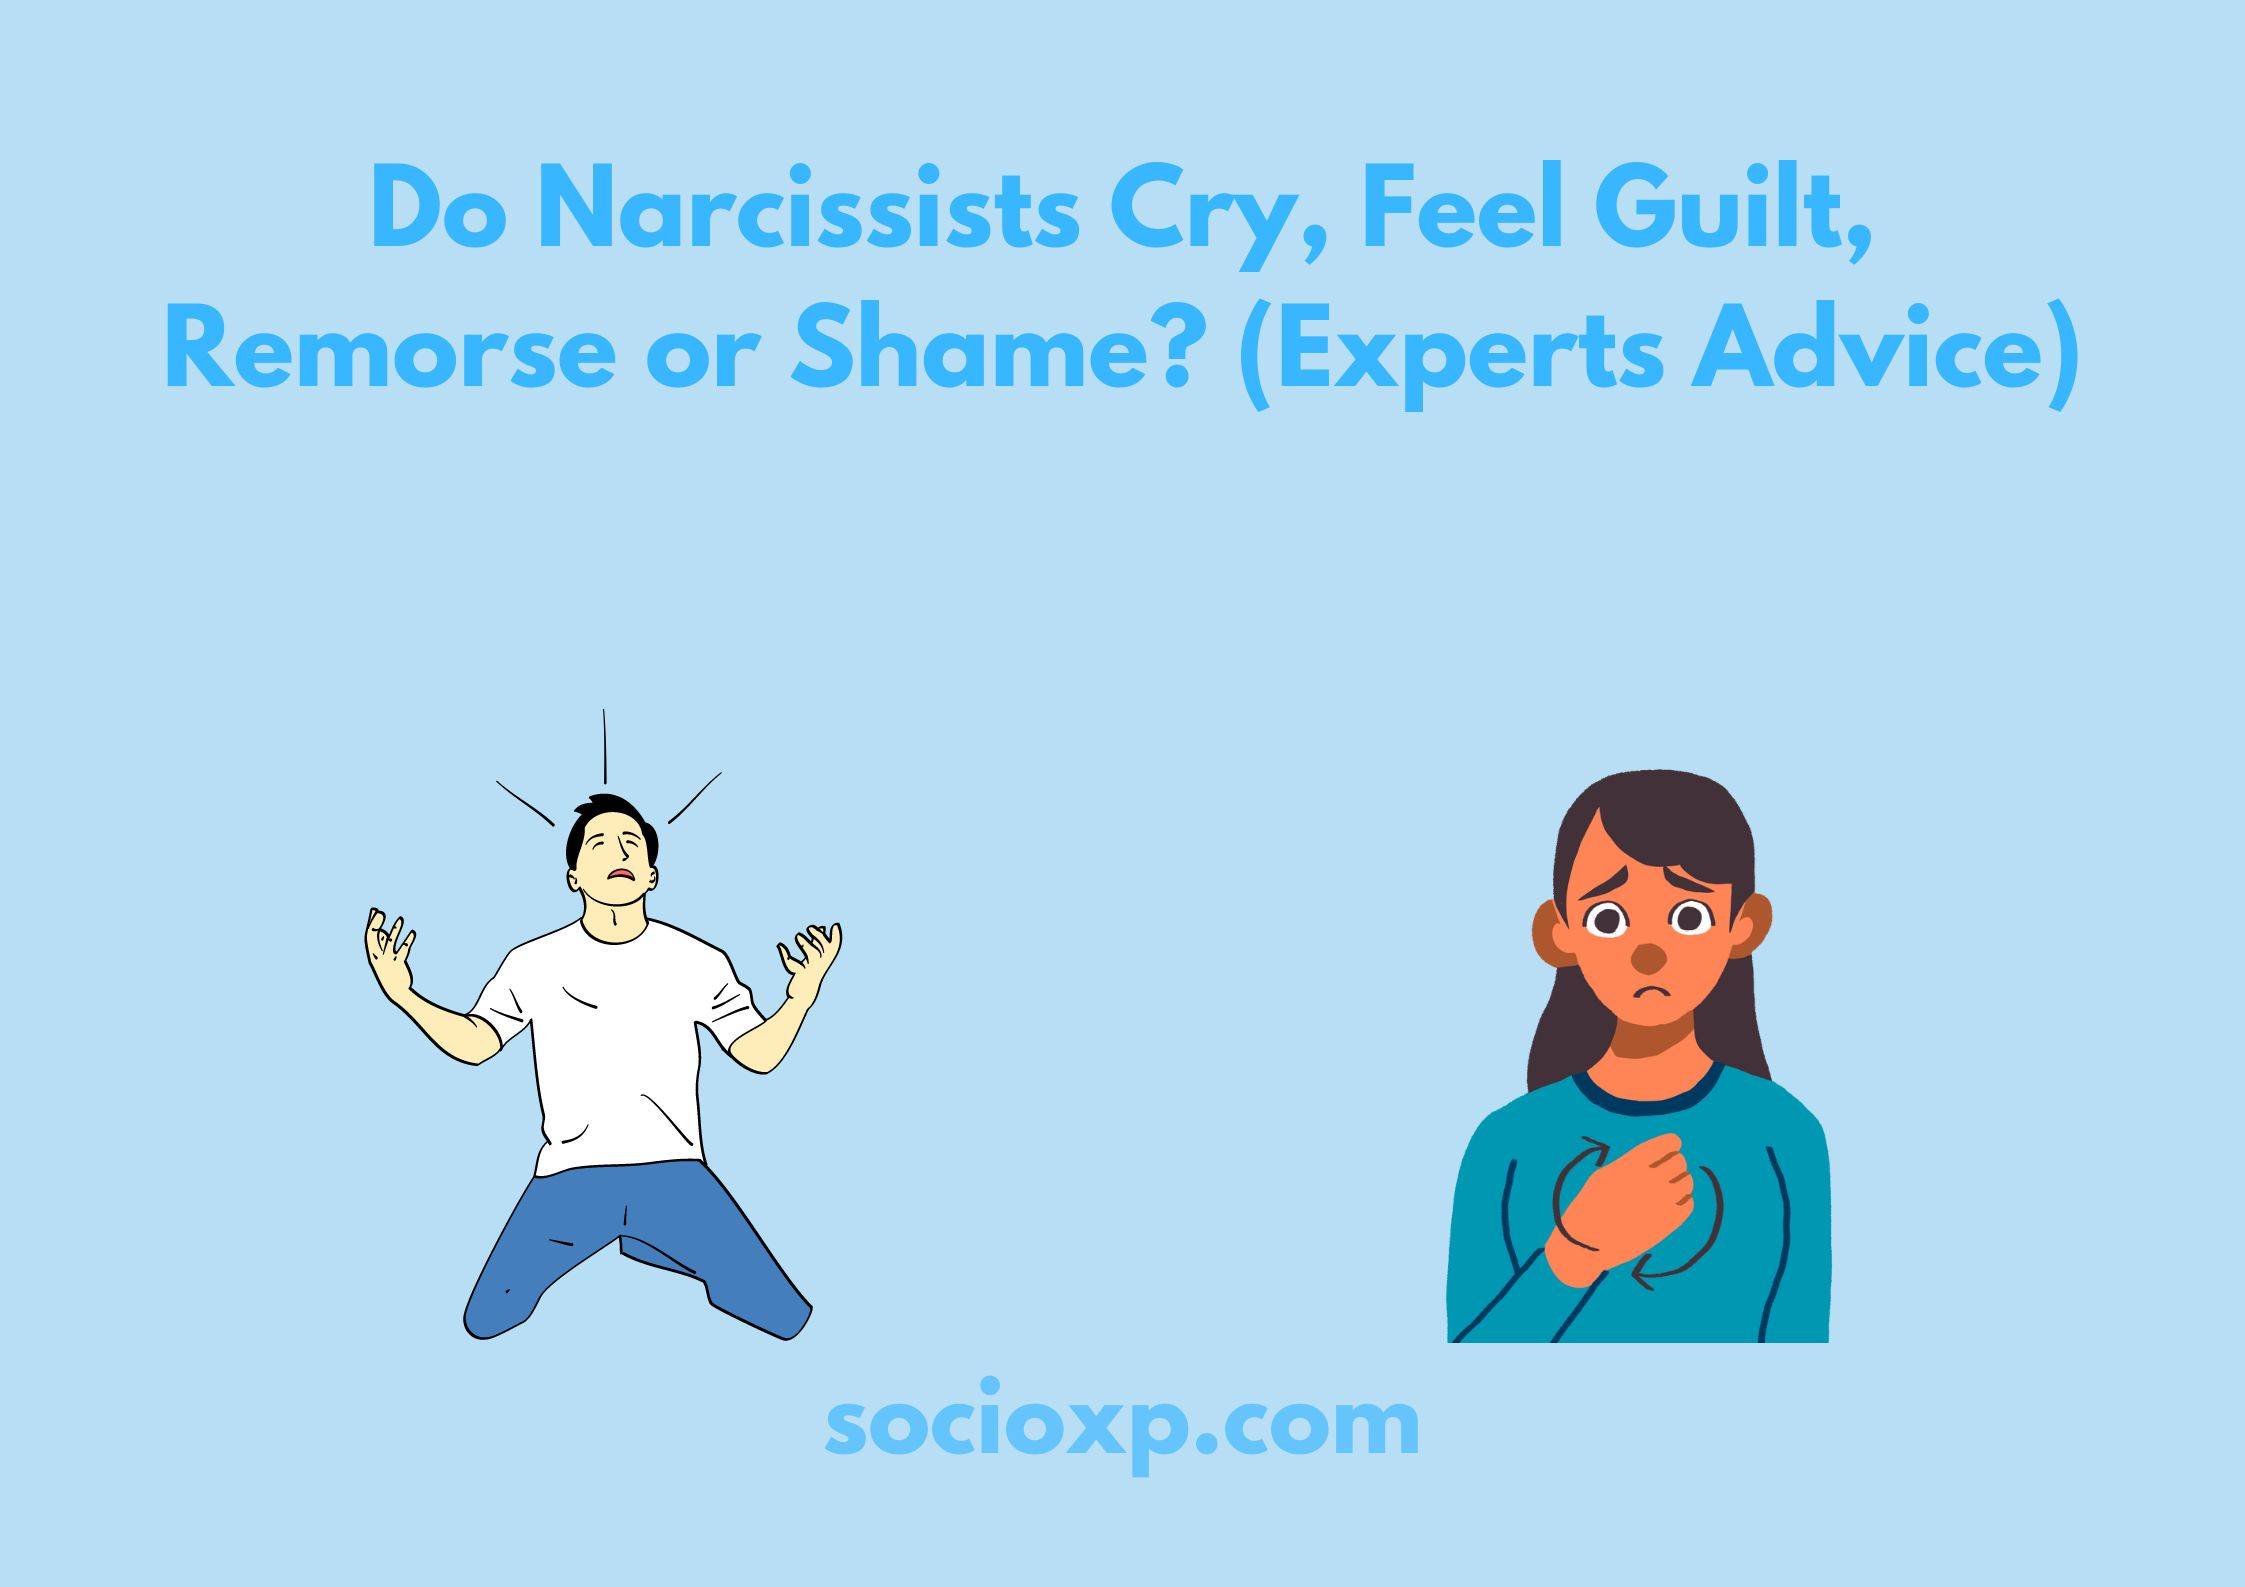 Do Narcissists Cry, Feel Guilt, Remorse or Shame? (Experts Advice)